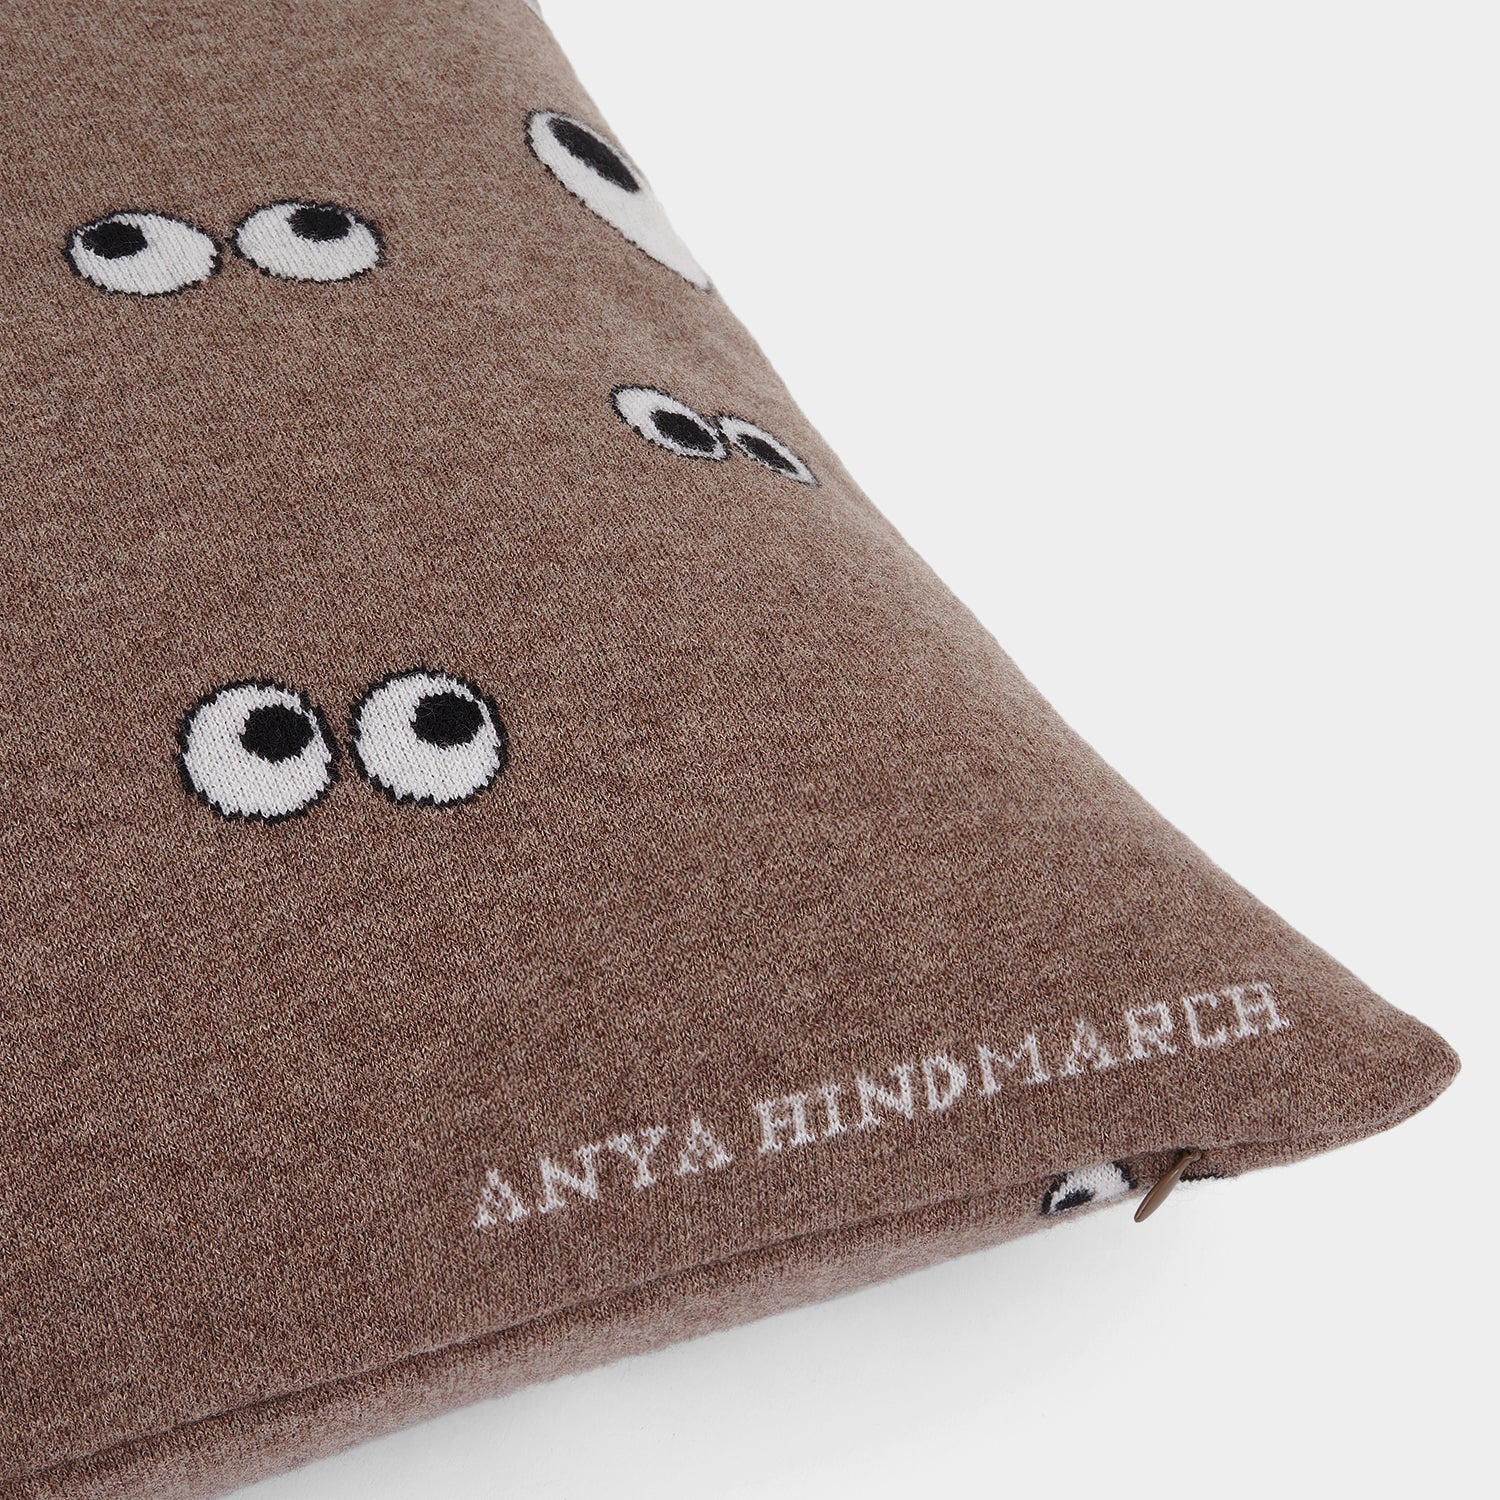 All Over Eyes Cushion -

                  
                    Lambswool in Vole -
                  

                  Anya Hindmarch US
